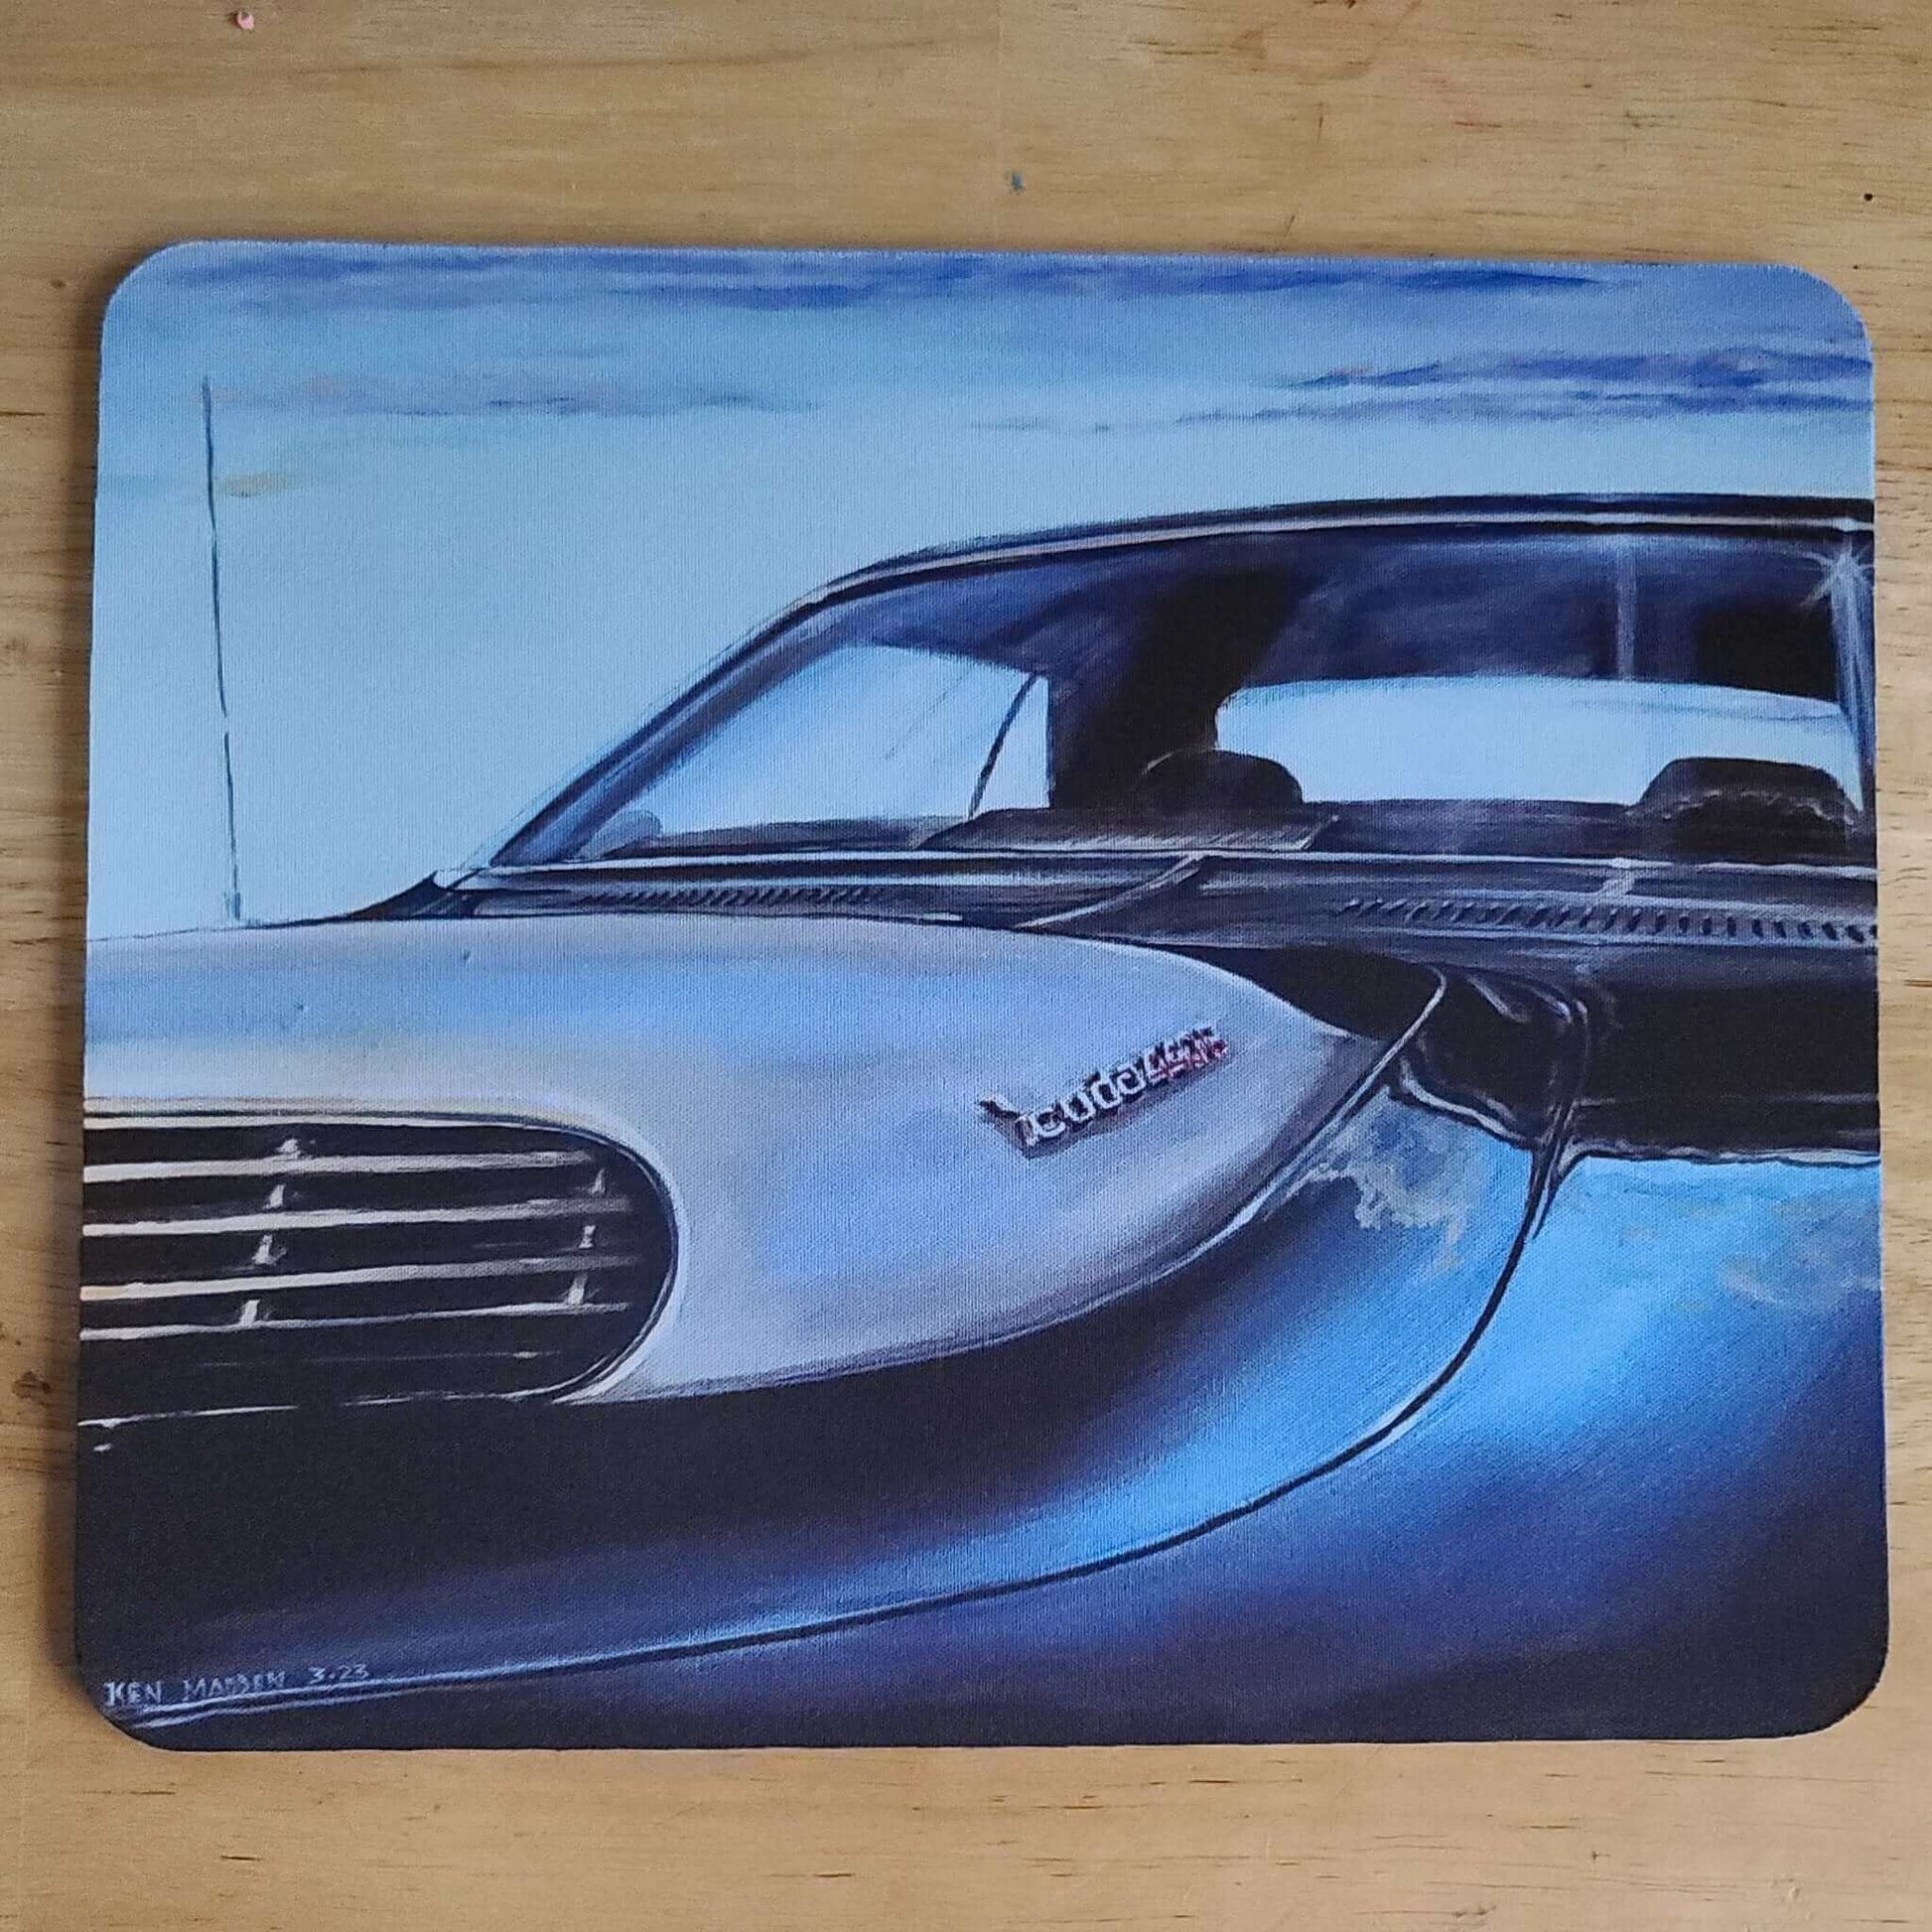 CUA 440 6 - Mouse pad - Horrible Designs